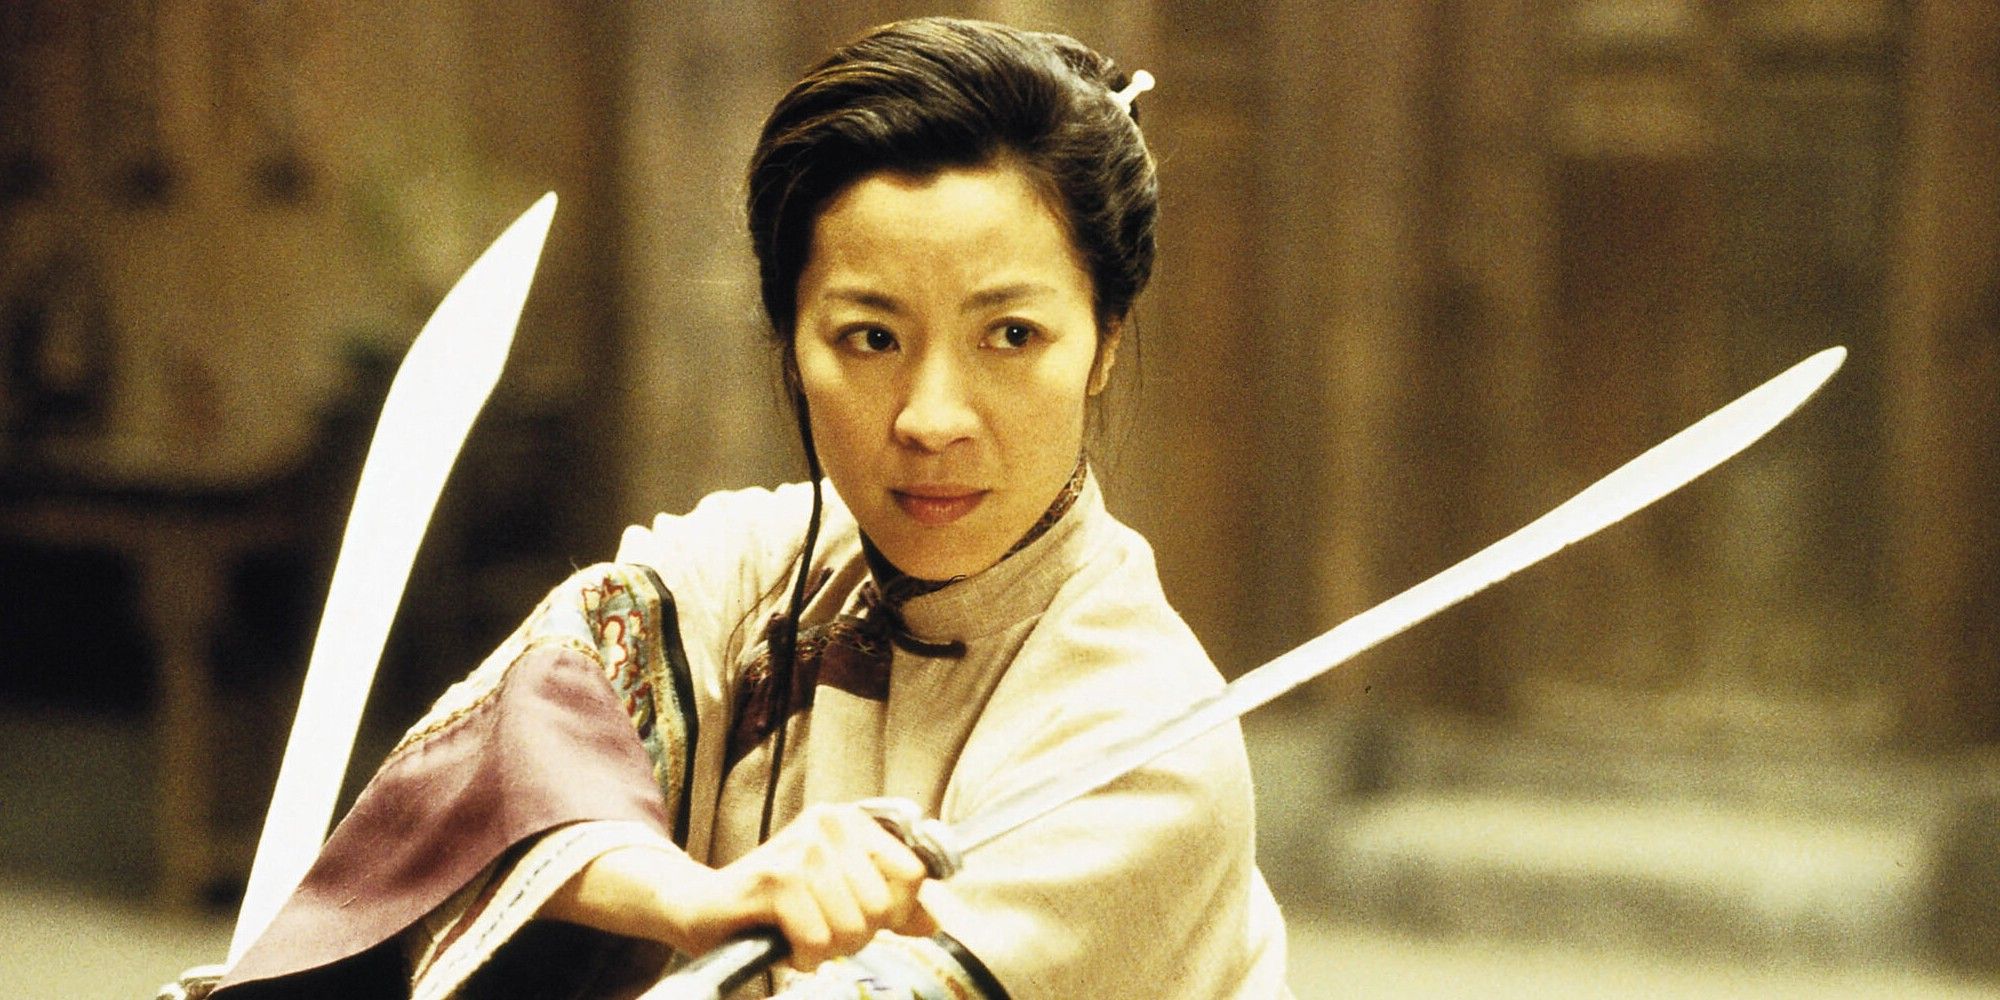 Michelle Yeoh performing martial arts